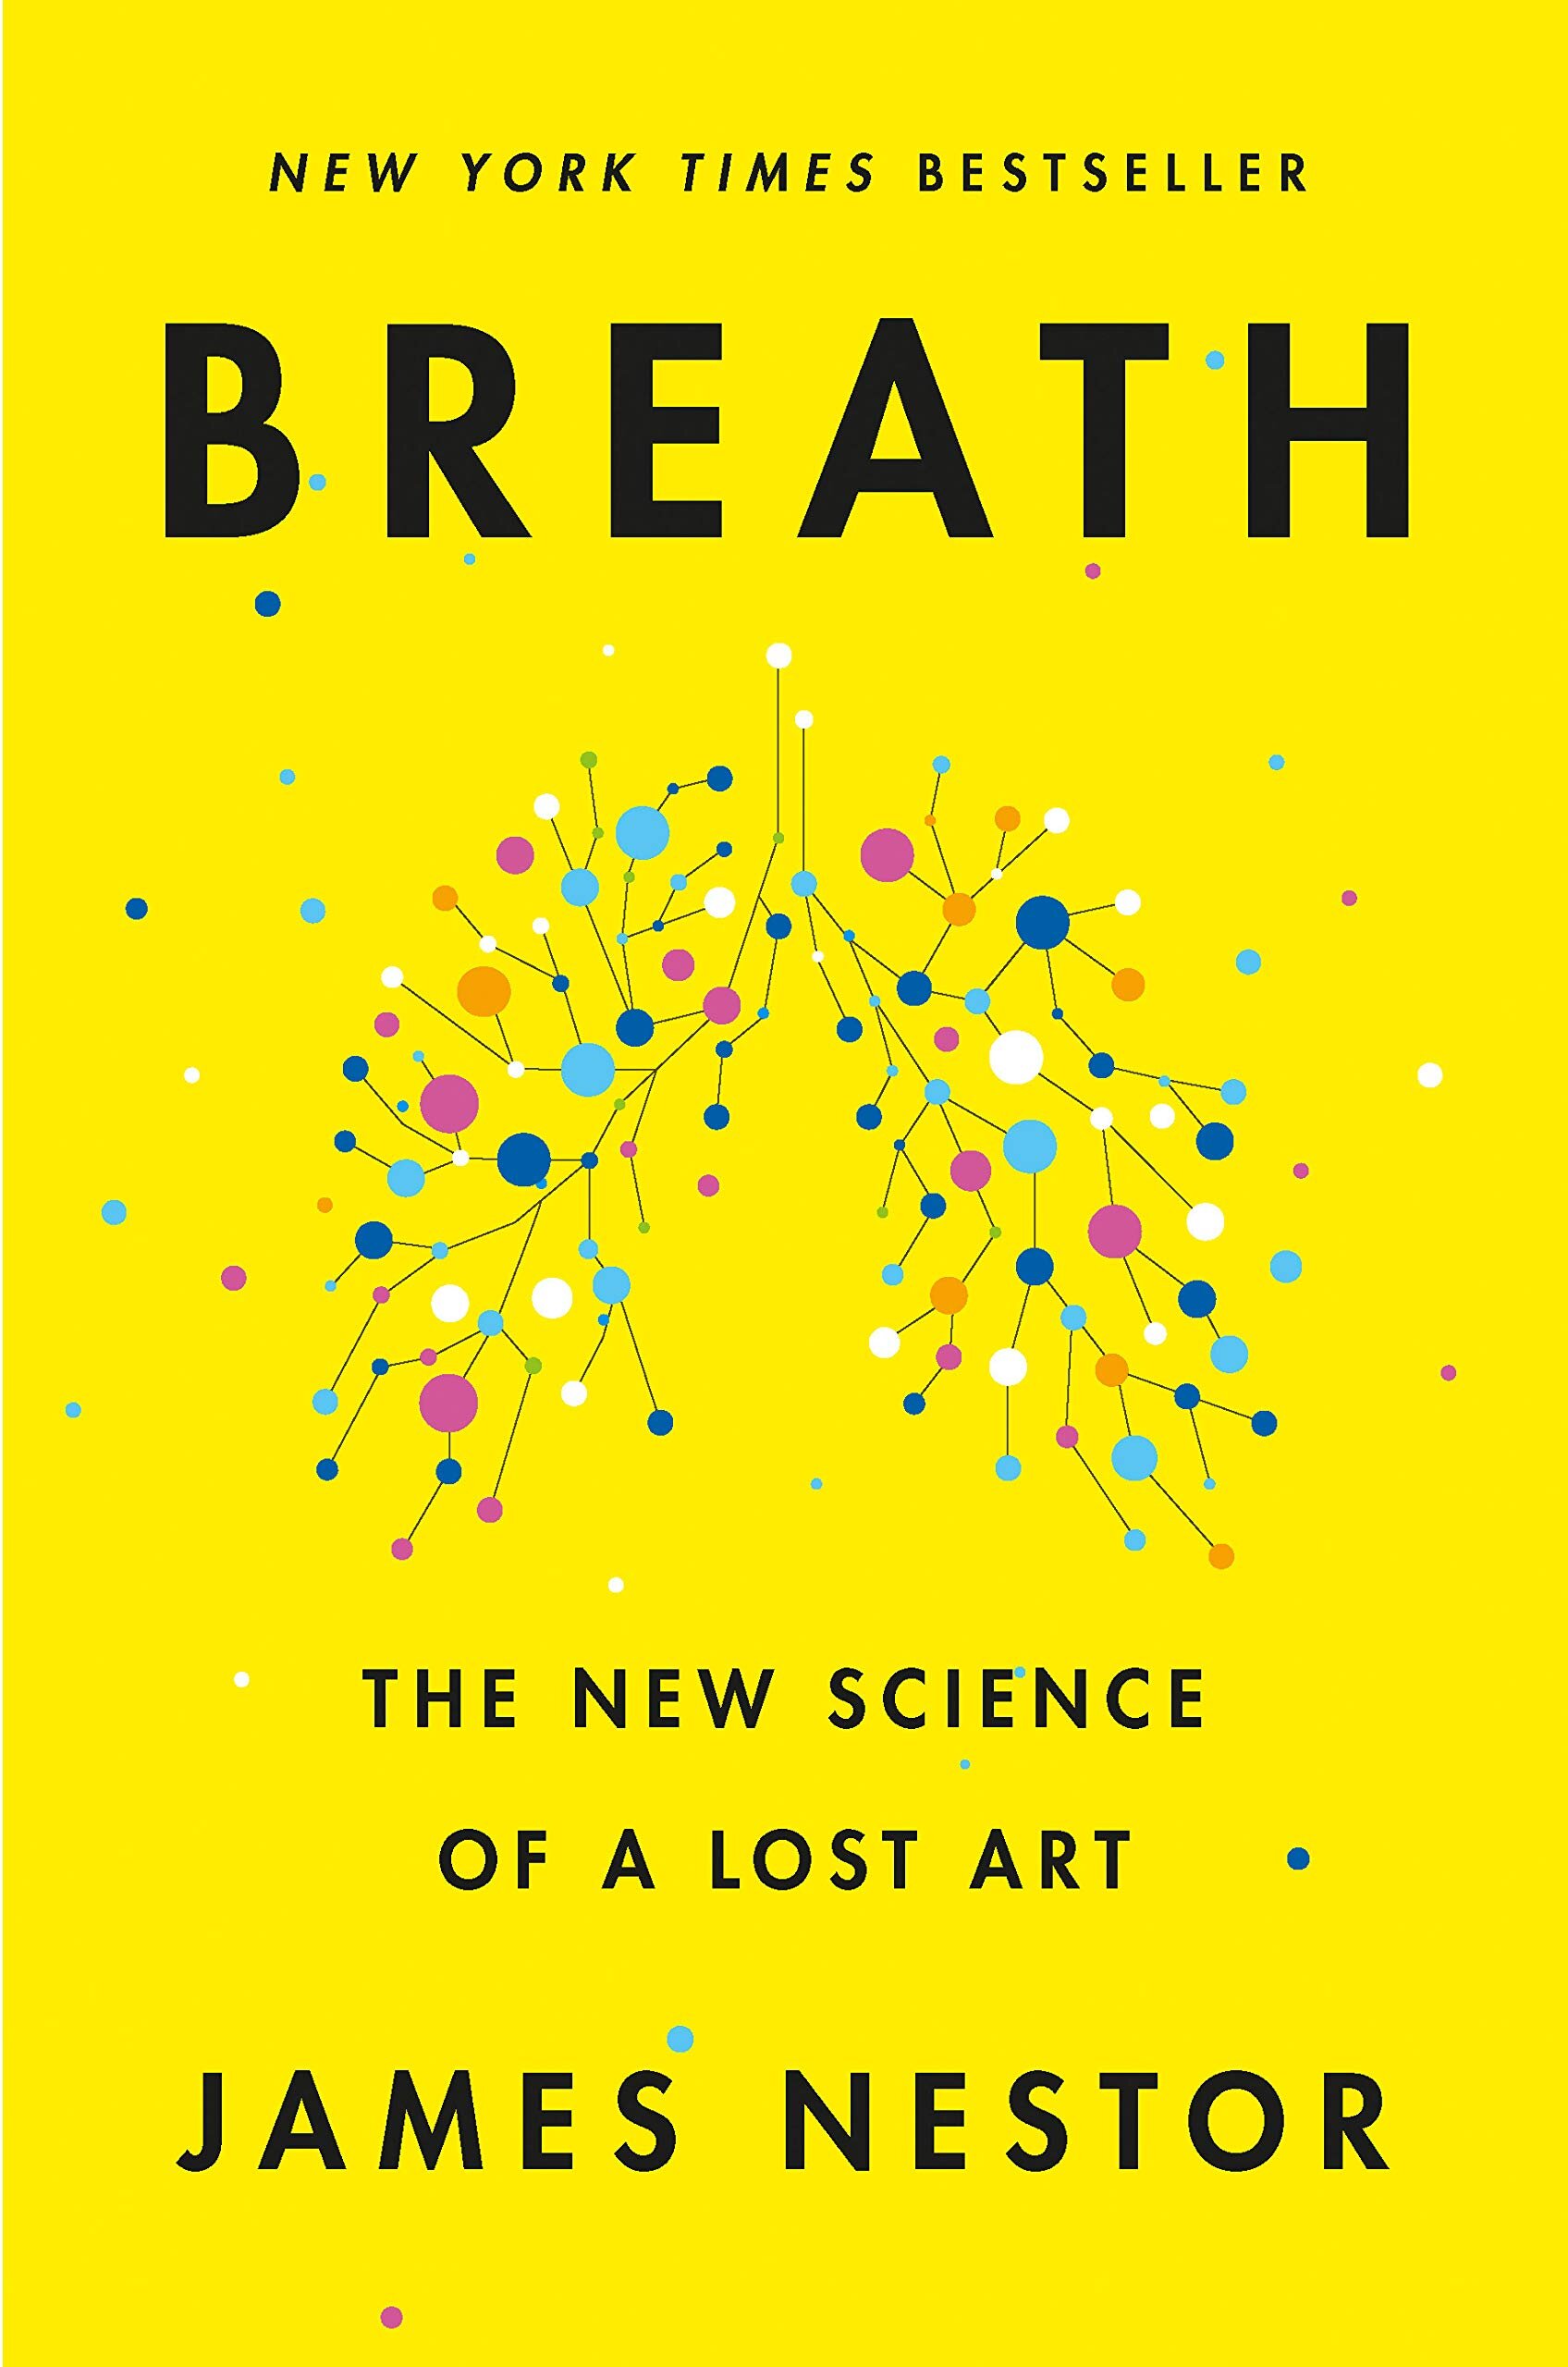 Boek: Breath, the new science of a lost art